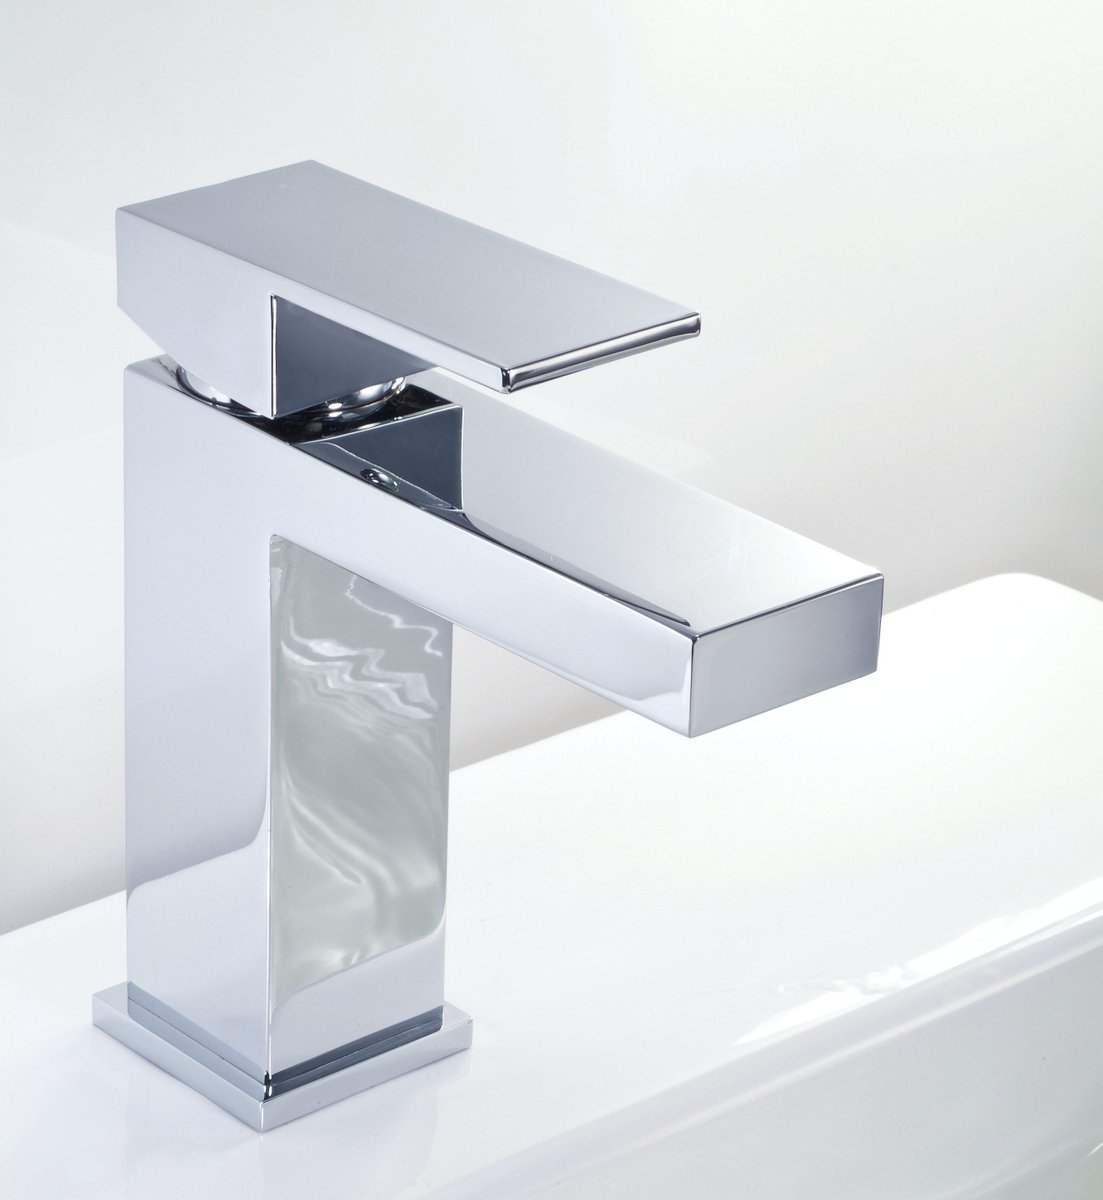 We have a comprehensive variety of types; including basin mixers, basin pillars, bath fillers, bath pillars, bath shower mixers, bidet mixers, floor-mounted bath taps, overflow bath fillers & tall basin mixers. Check out our taps >> bit.ly/36IbyAM #bathroom #taps